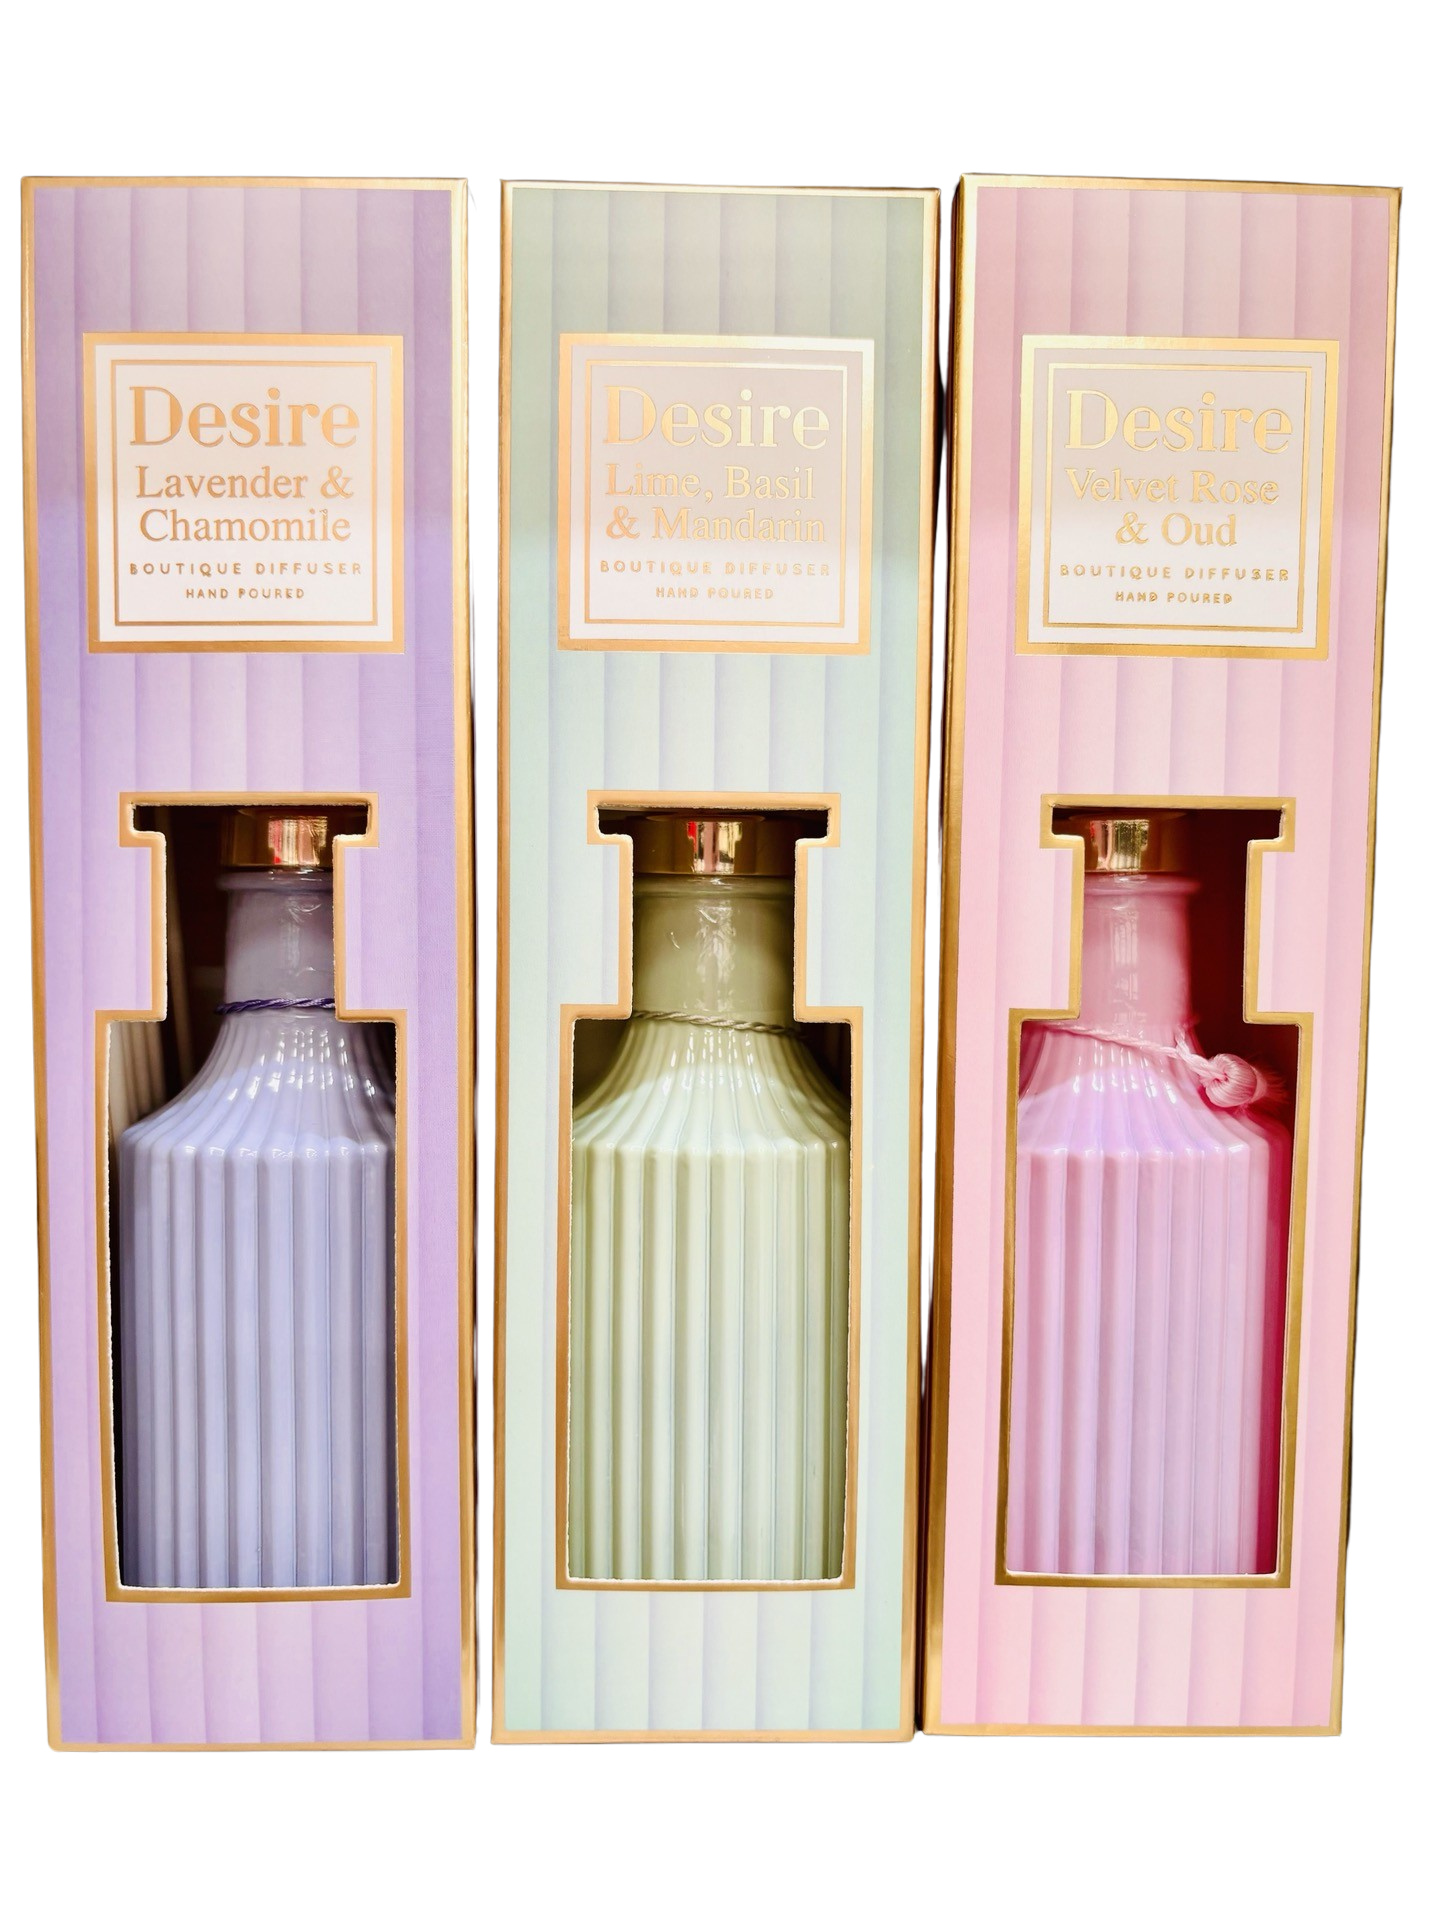 Three bottles of "150ml Reed Diffuser Pastel Colours" eau de parfum from the Opulence Collection in a display case, each labeled with different scents: lavender & chamomile, lemon basil & mint by The Soap Gal x.